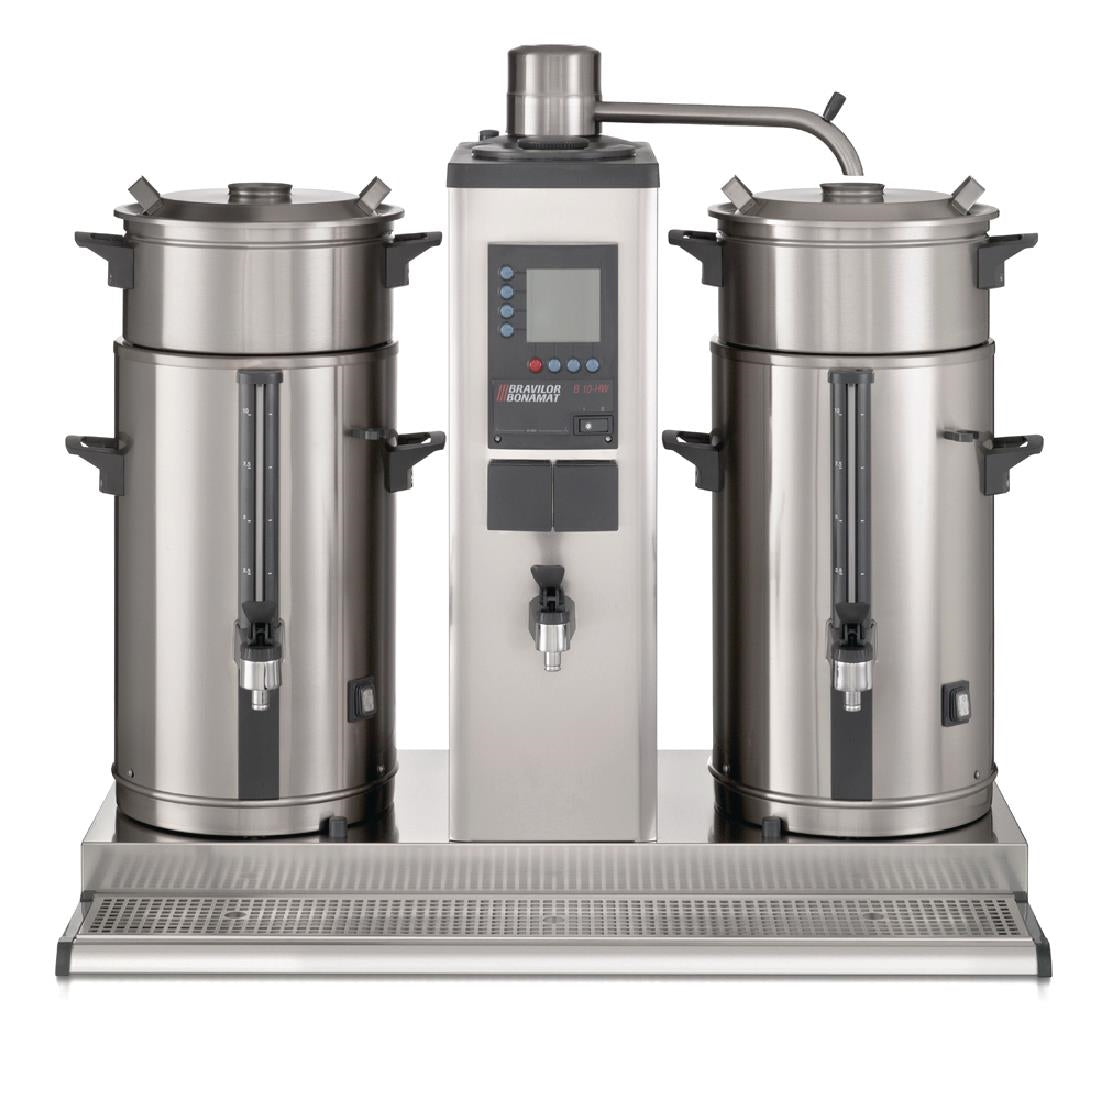 DC690-1P Bravilor B10 HW Bulk Coffee Brewer with 2x10Ltr Coffee Urns and Hot Water Tap JD Catering Equipment Solutions Ltd